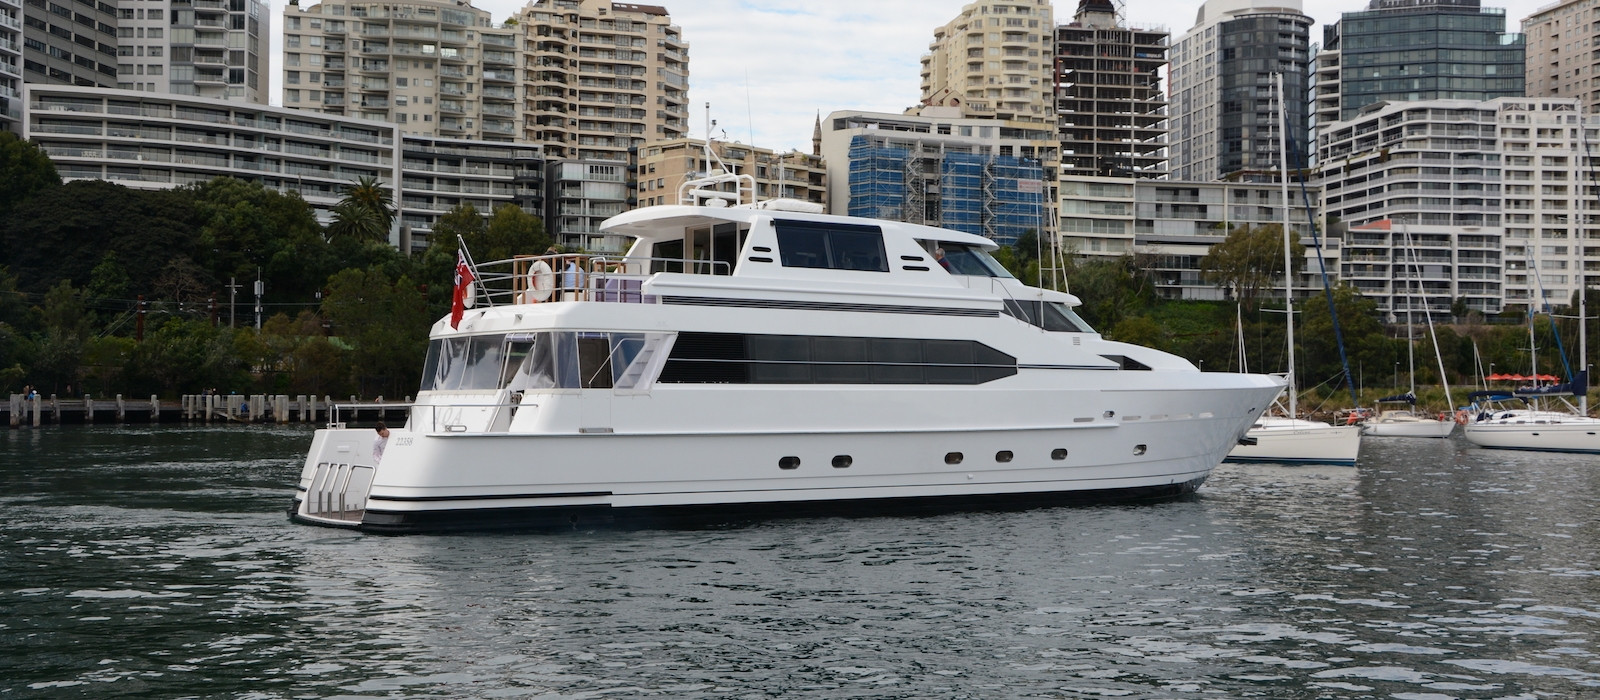 Stern view of AQA luxury boat hire at Lavender Bay